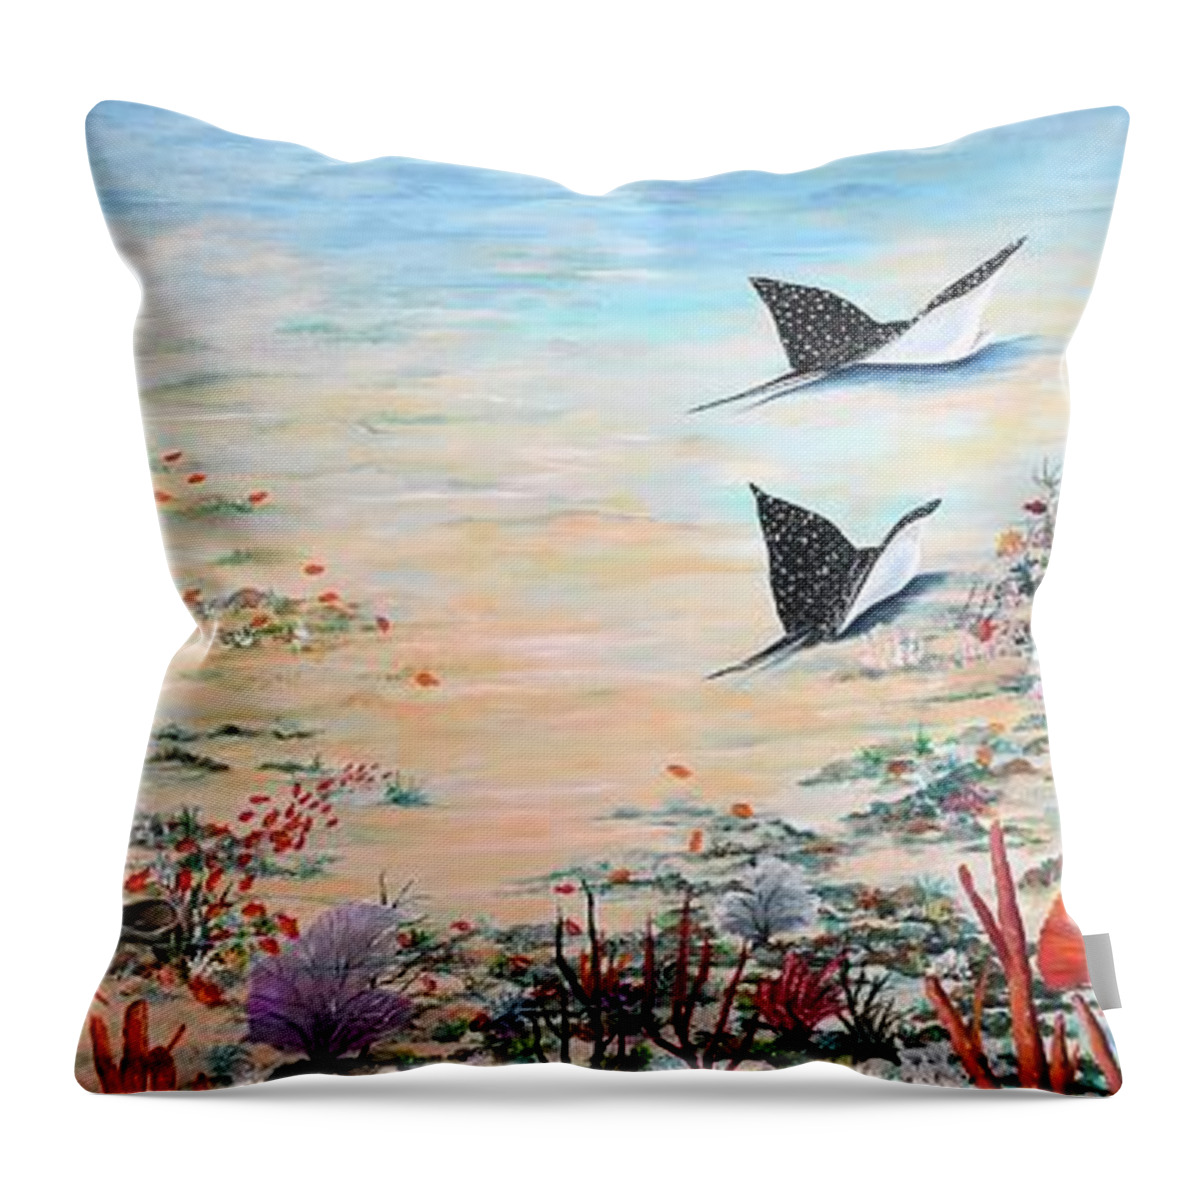 Sting Rays Throw Pillow featuring the painting Passing Through by Karin Dawn Kelshall- Best